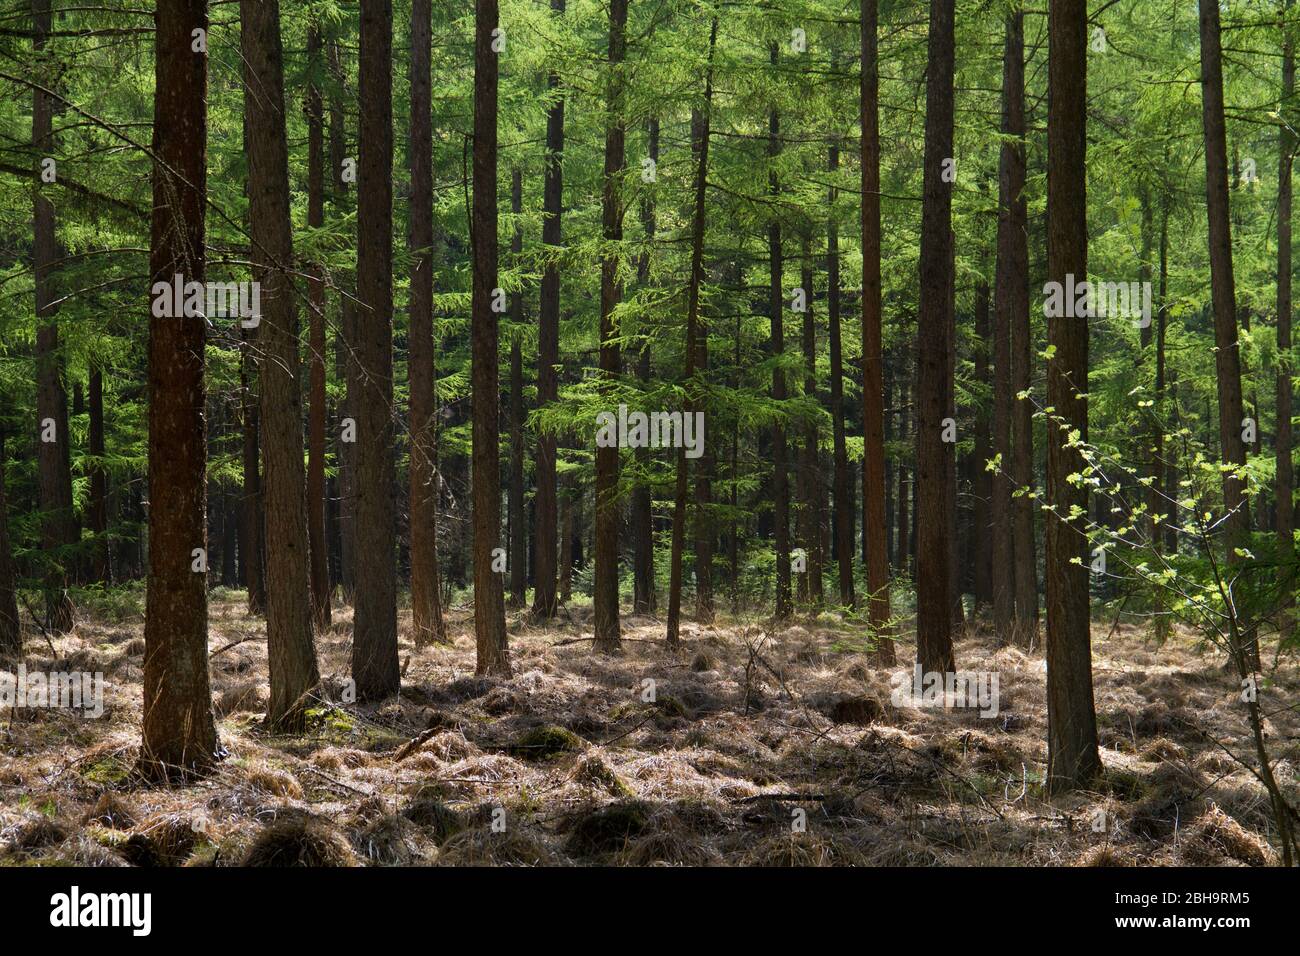 Woodland in spring: fresh green needle-like leaves and dark tree stems in a Larch forest, early in spring Stock Photo